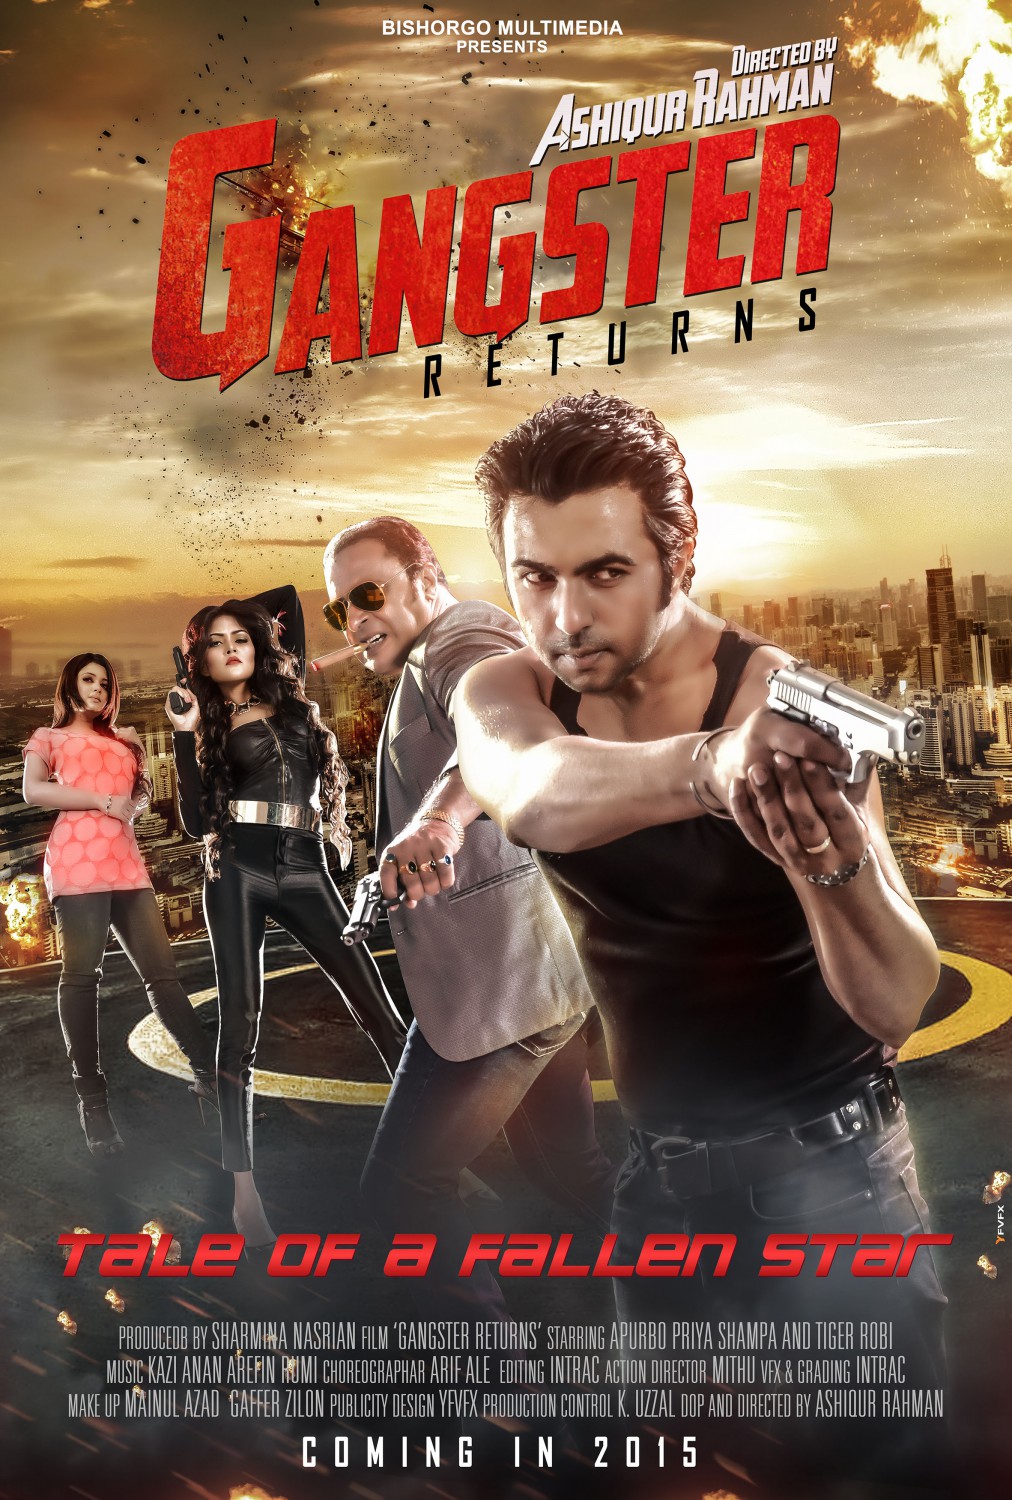 Extra Large Movie Poster Image for Gangster Returns (#9 of 9)